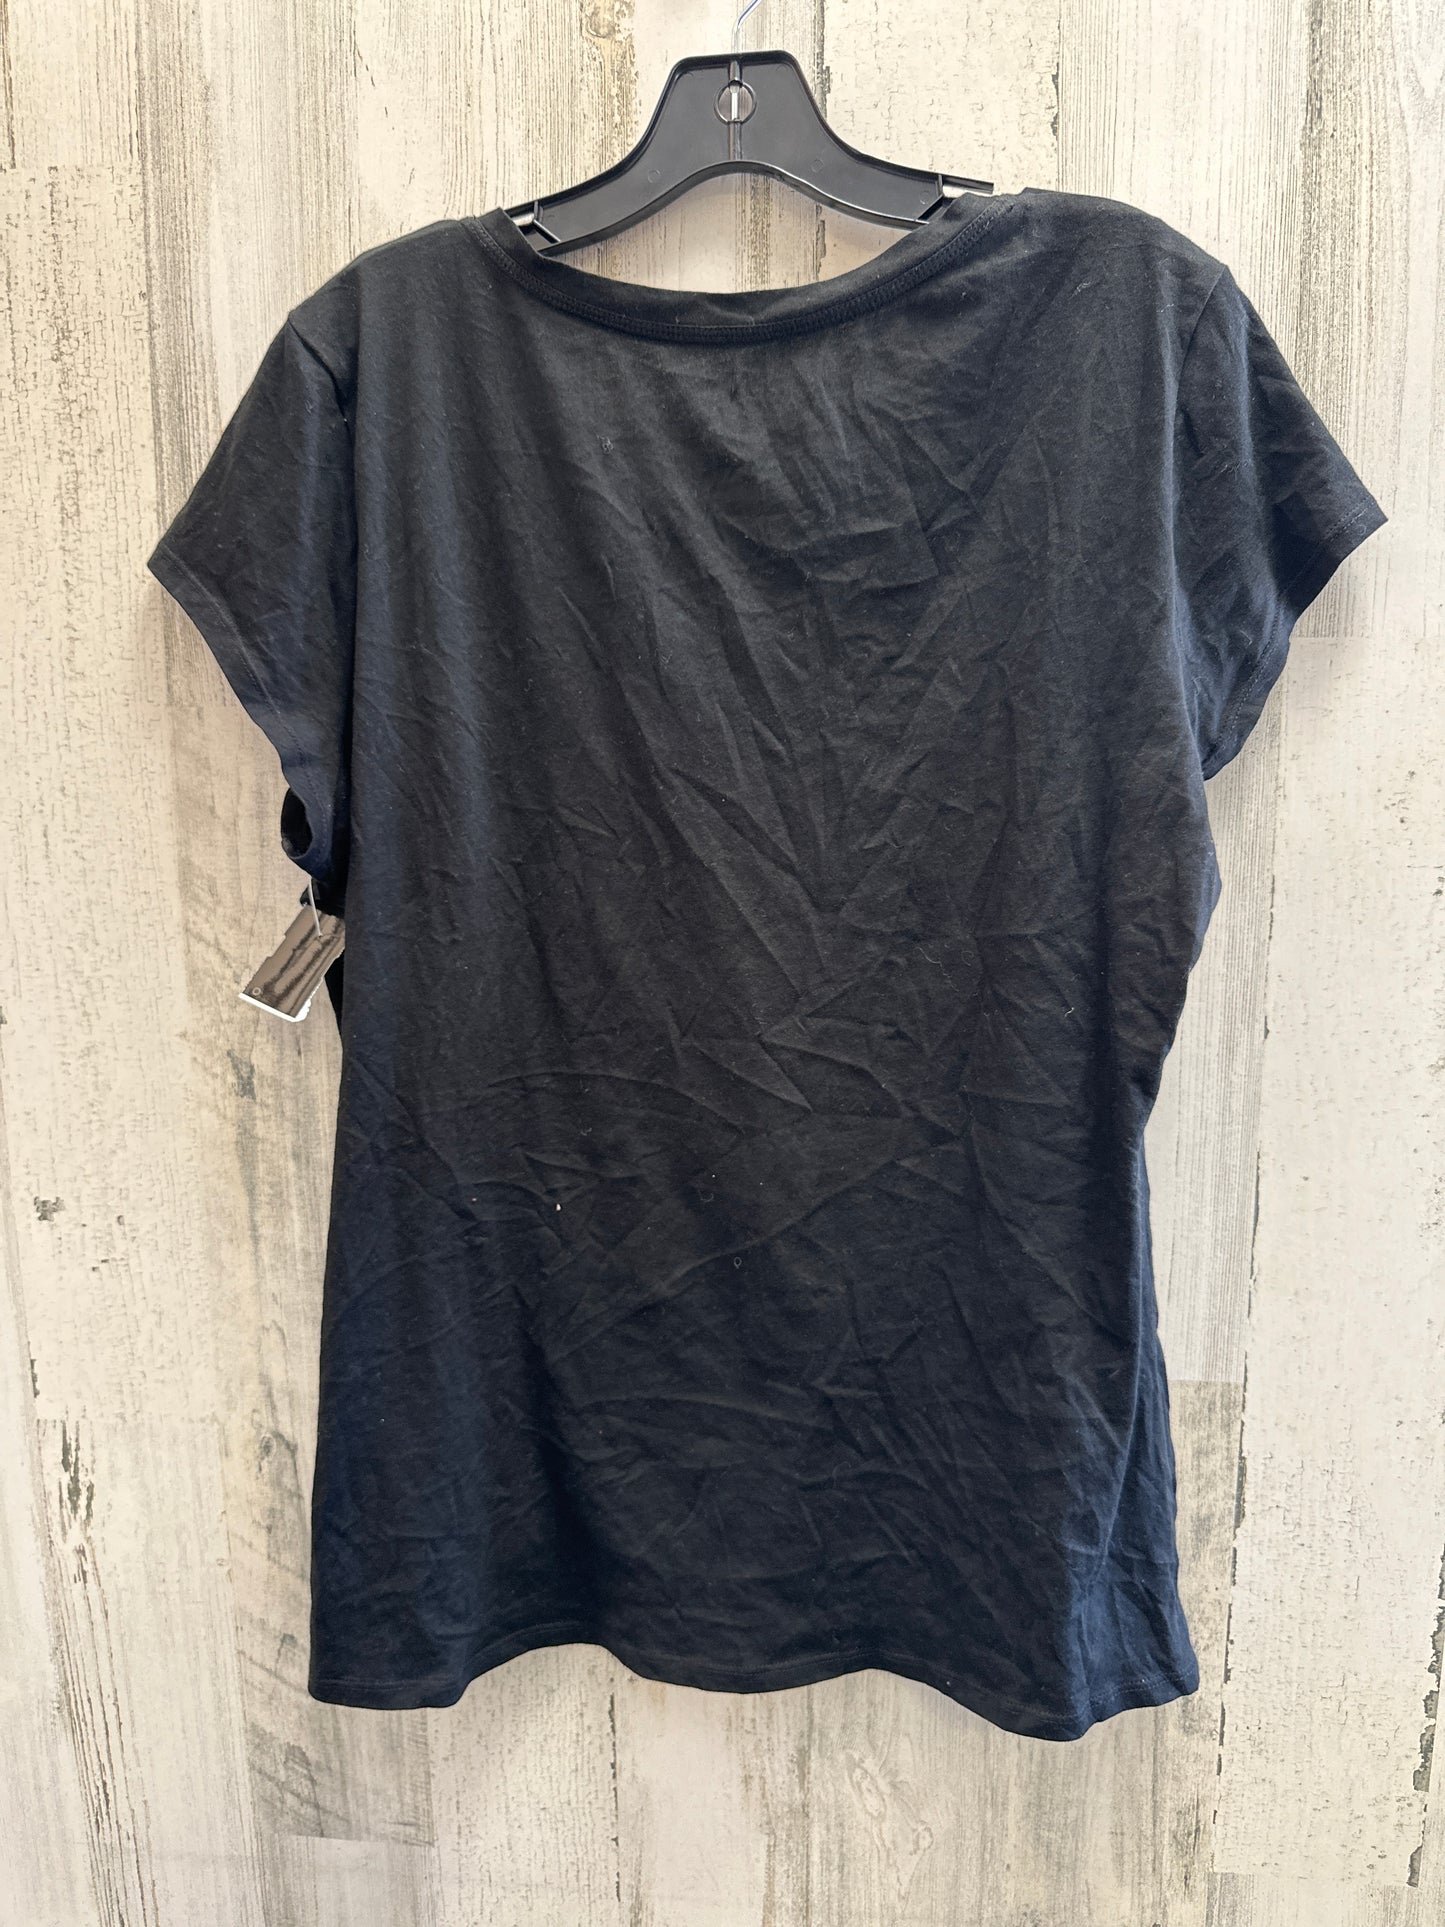 Black Top Short Sleeve Basic New York And Co, Size Xl